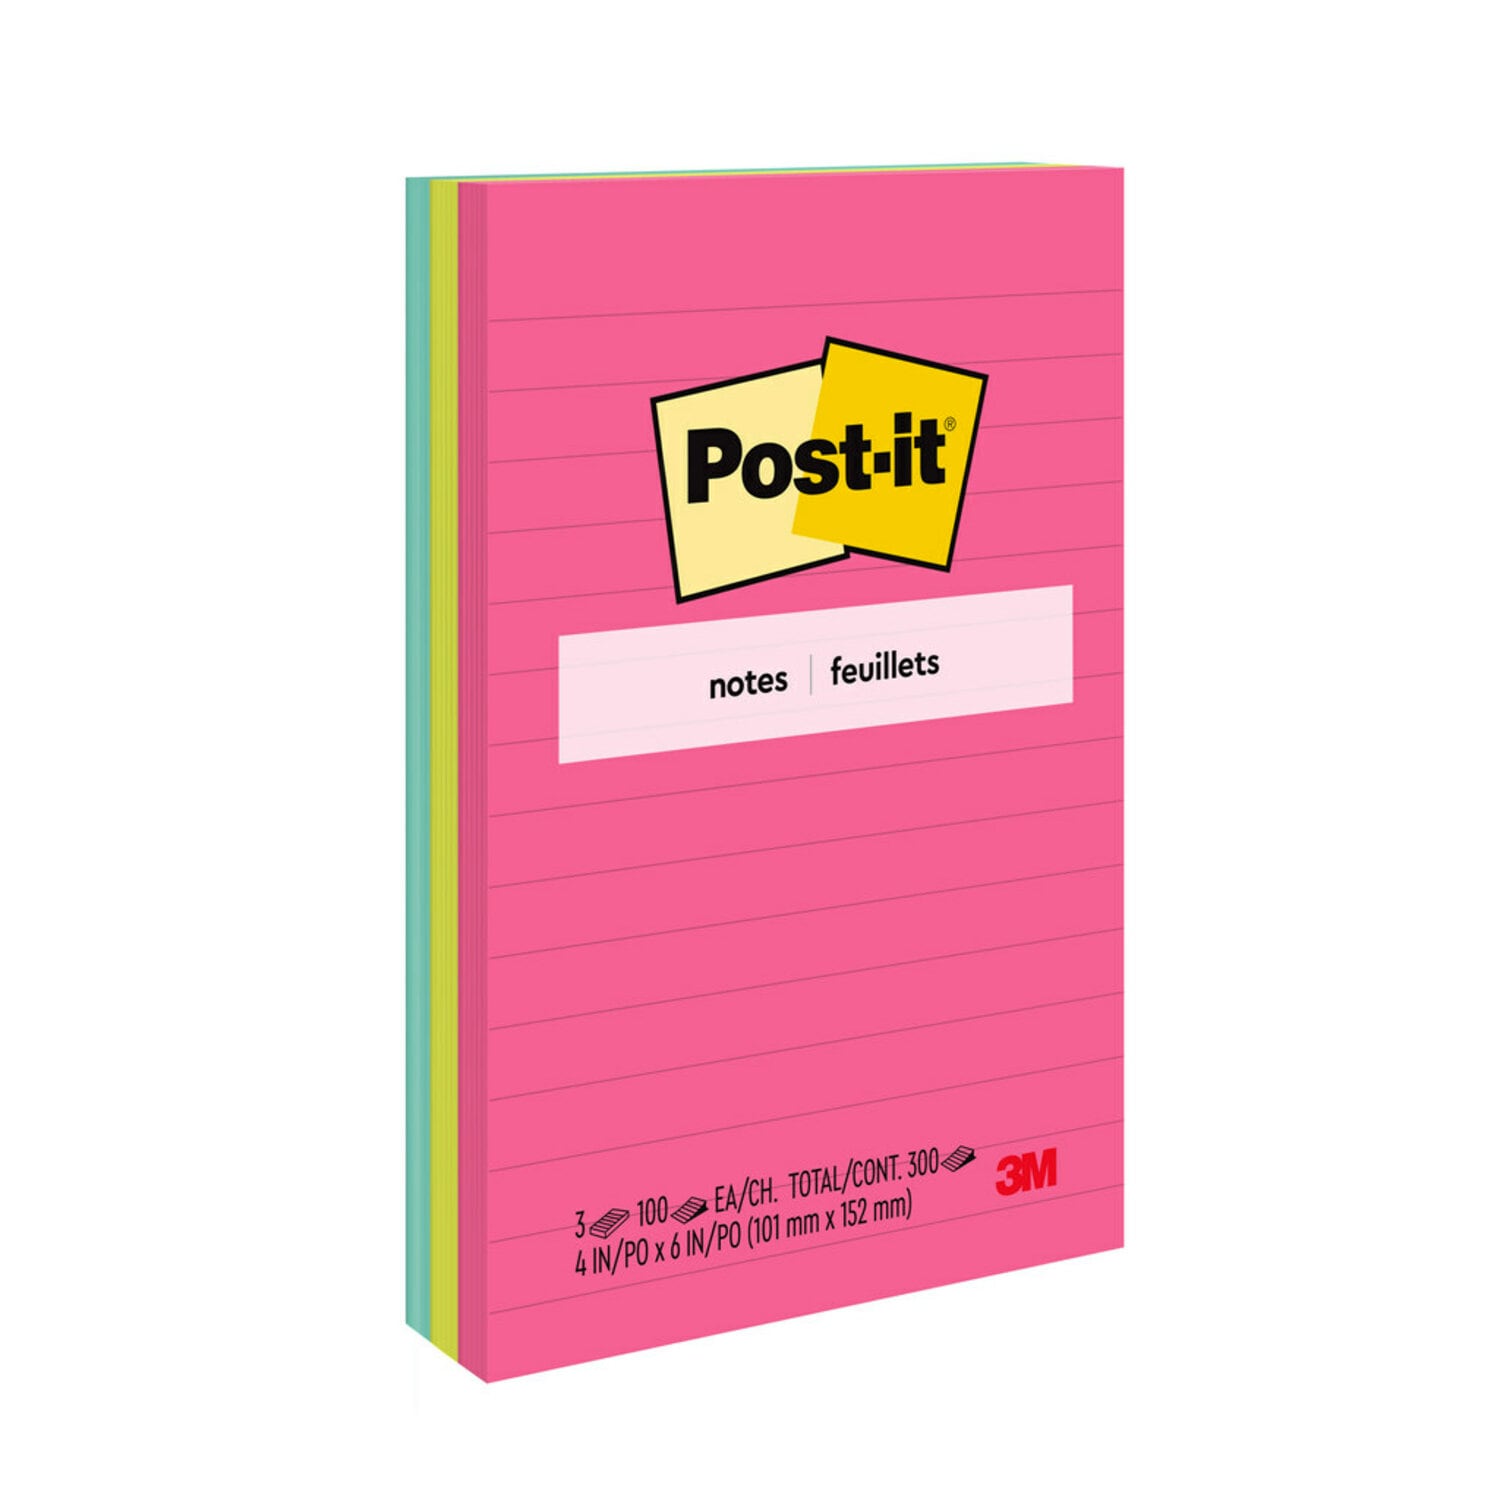 7100229683 - Post-it Notes 660-3AN, 4 in x 6 in (101 mm x 152 mm), Cape Town Colours